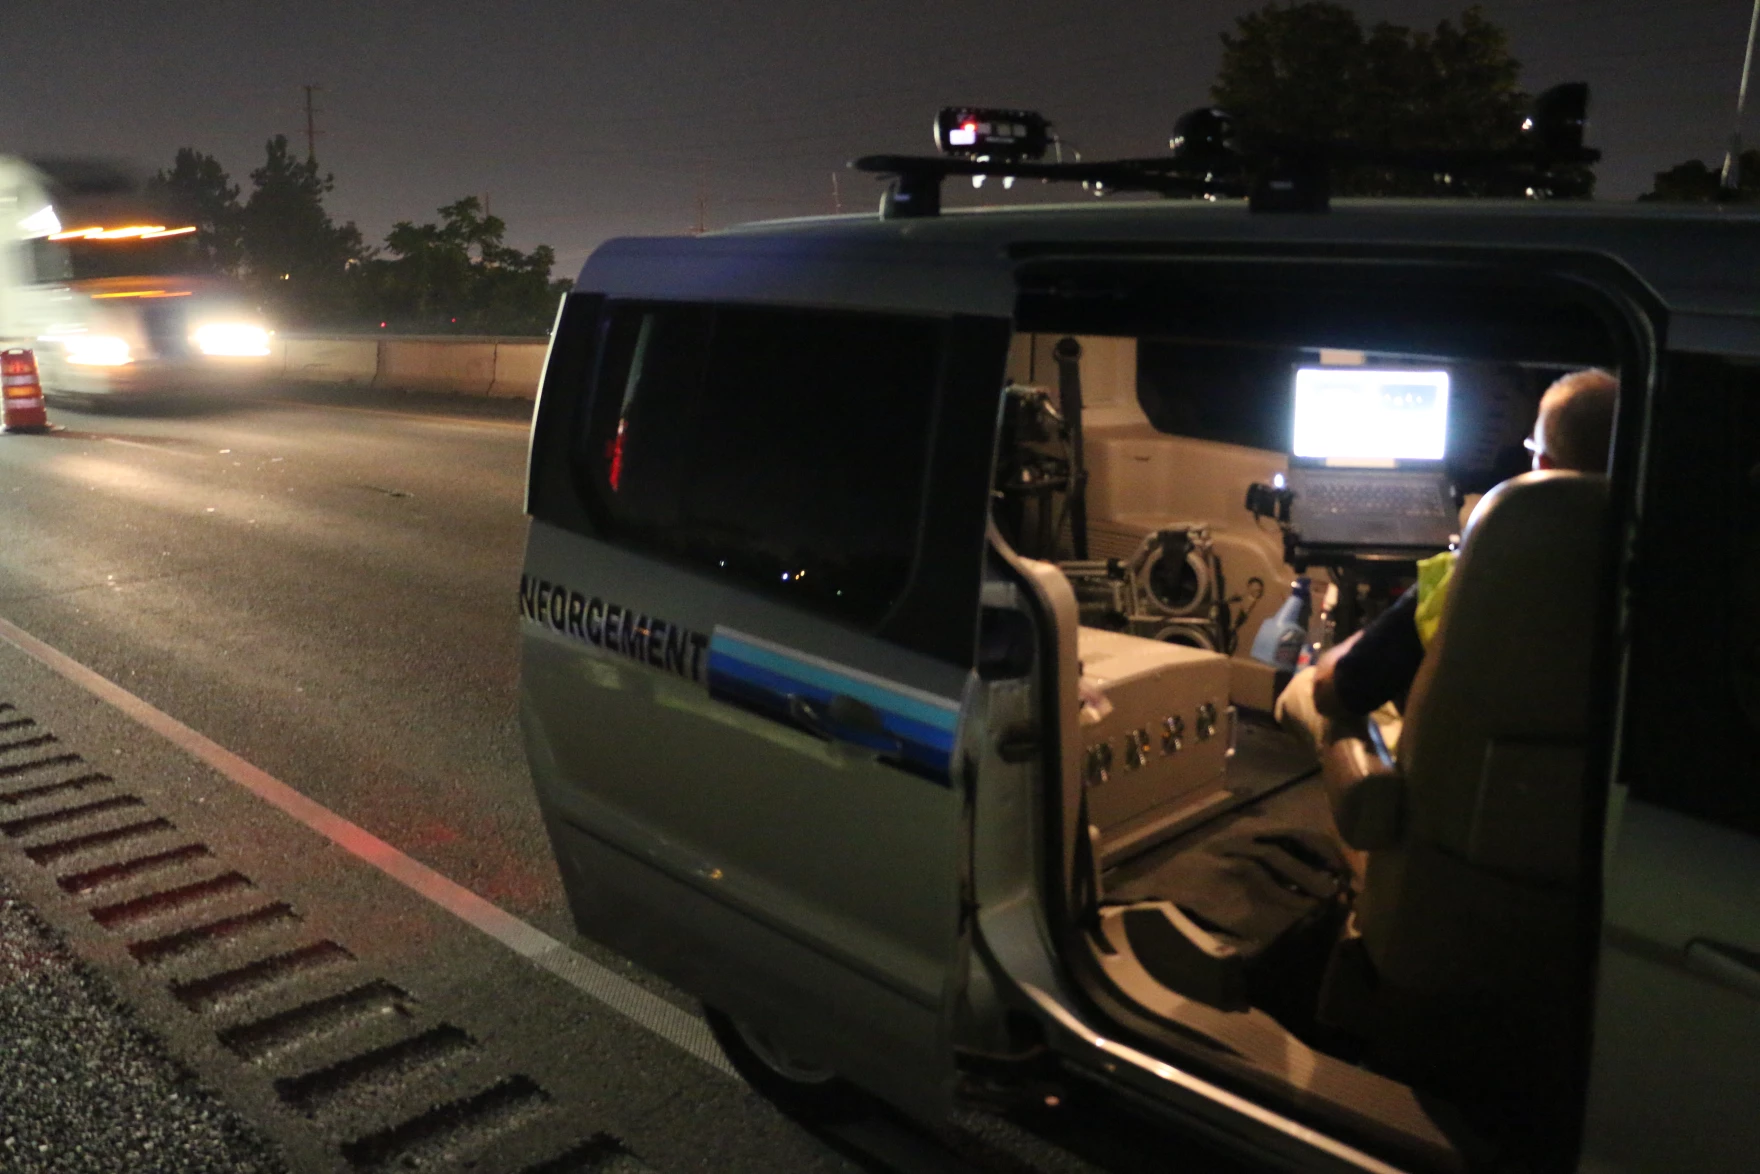 An officer works in a speed enforcement van along I-5 in Medford during construction in 2018. The effort to slow drivers nabbed one speeder going 91 mph in the 40 mph work zone